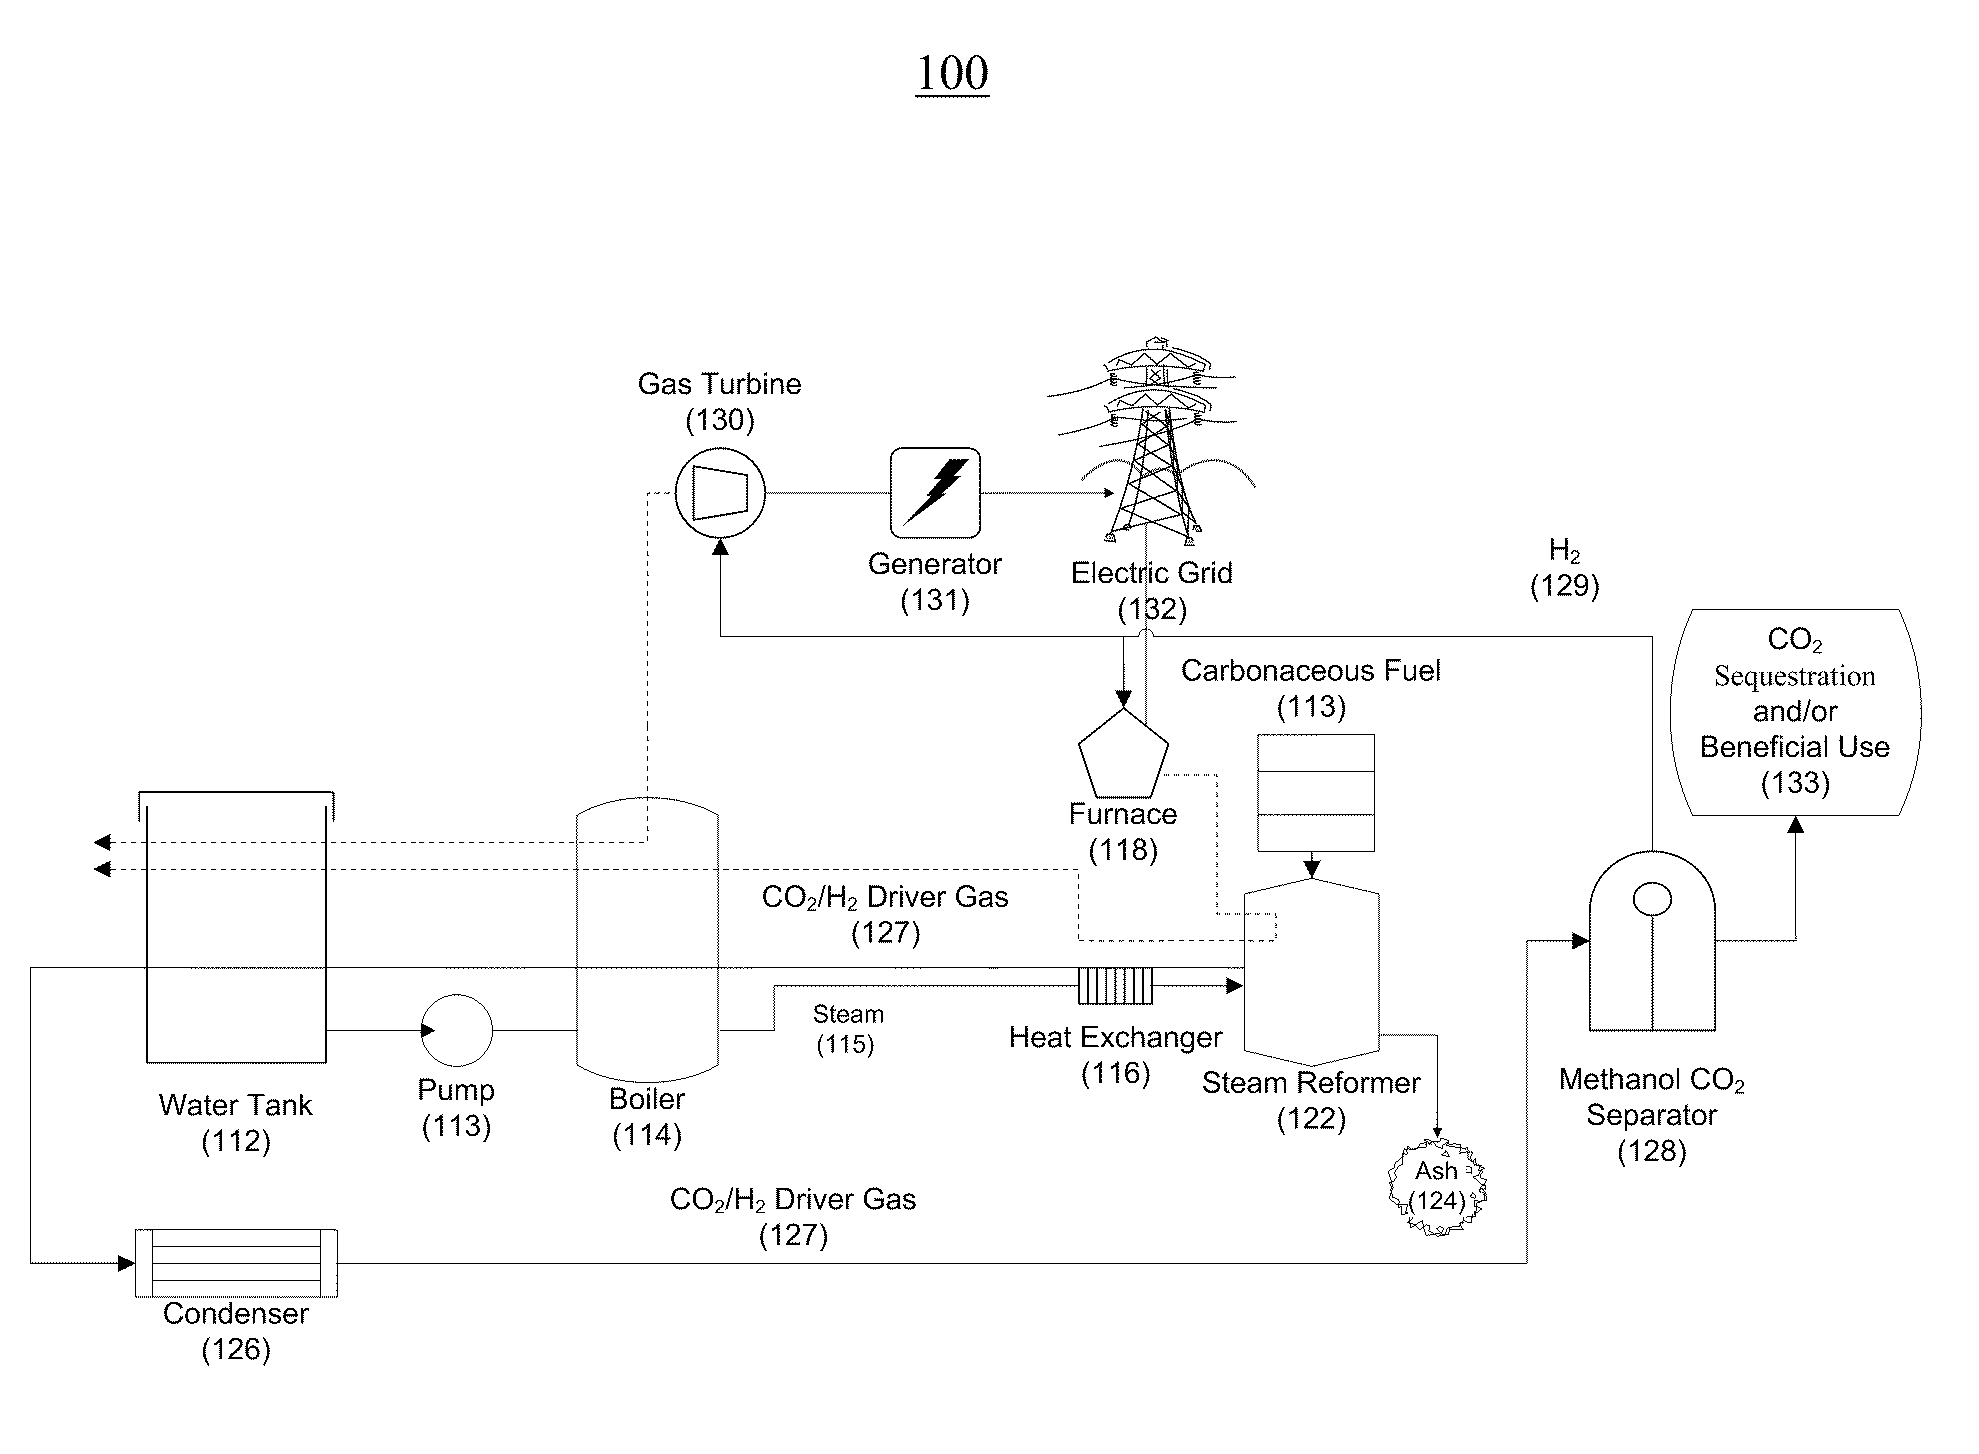 Systems and methods for generating electricity from carbonaceous material with substantially no carbon dioxide emissions